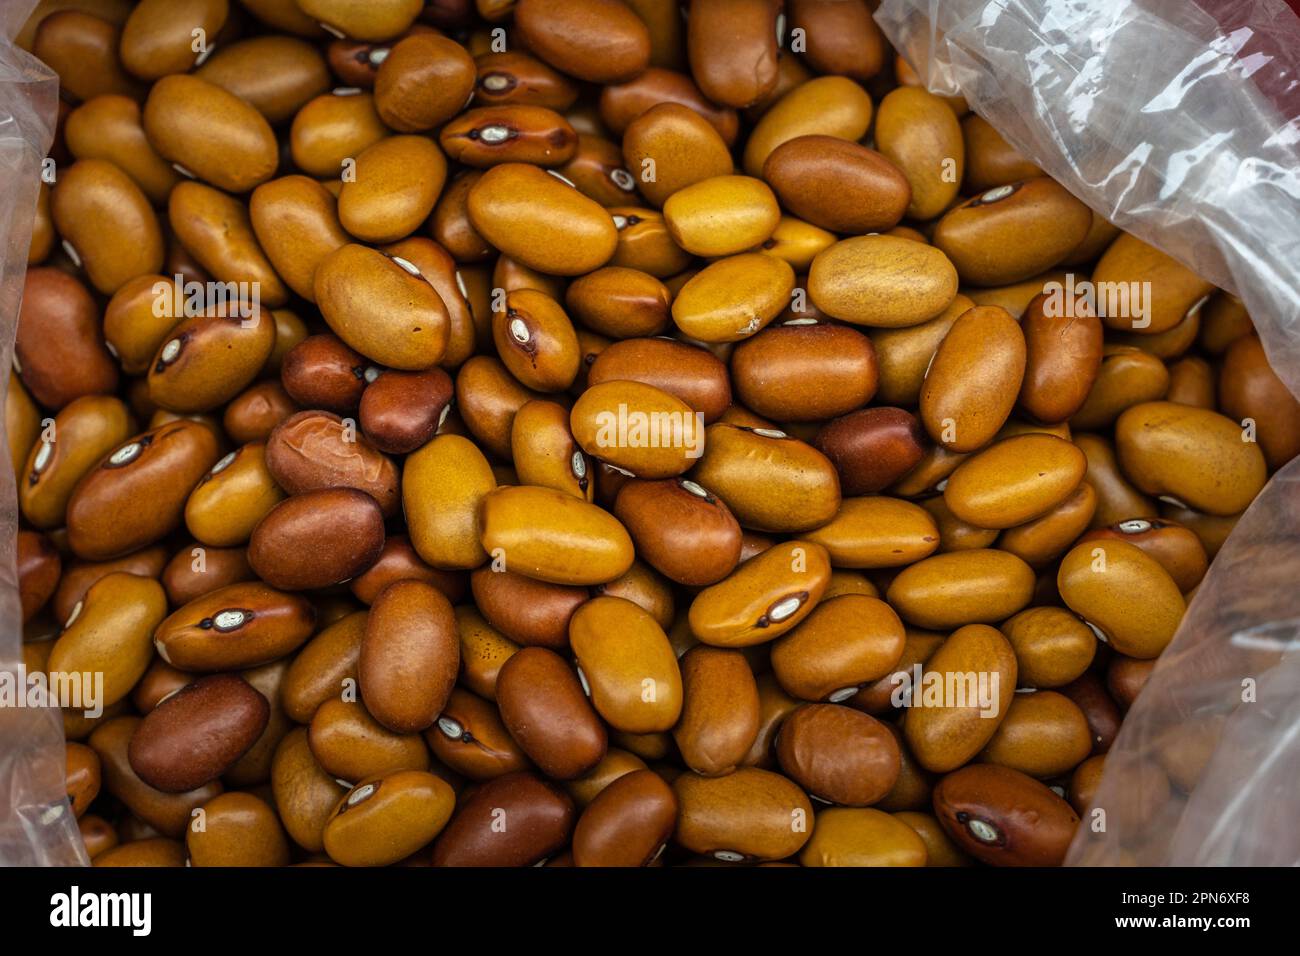 Tobacco Bean Seeds (Phaseolus vulgaris). The name comes from the beautiful bright brown color reminiscent of fermented tobacco. Abruzzo, Italy, Europe Stock Photo